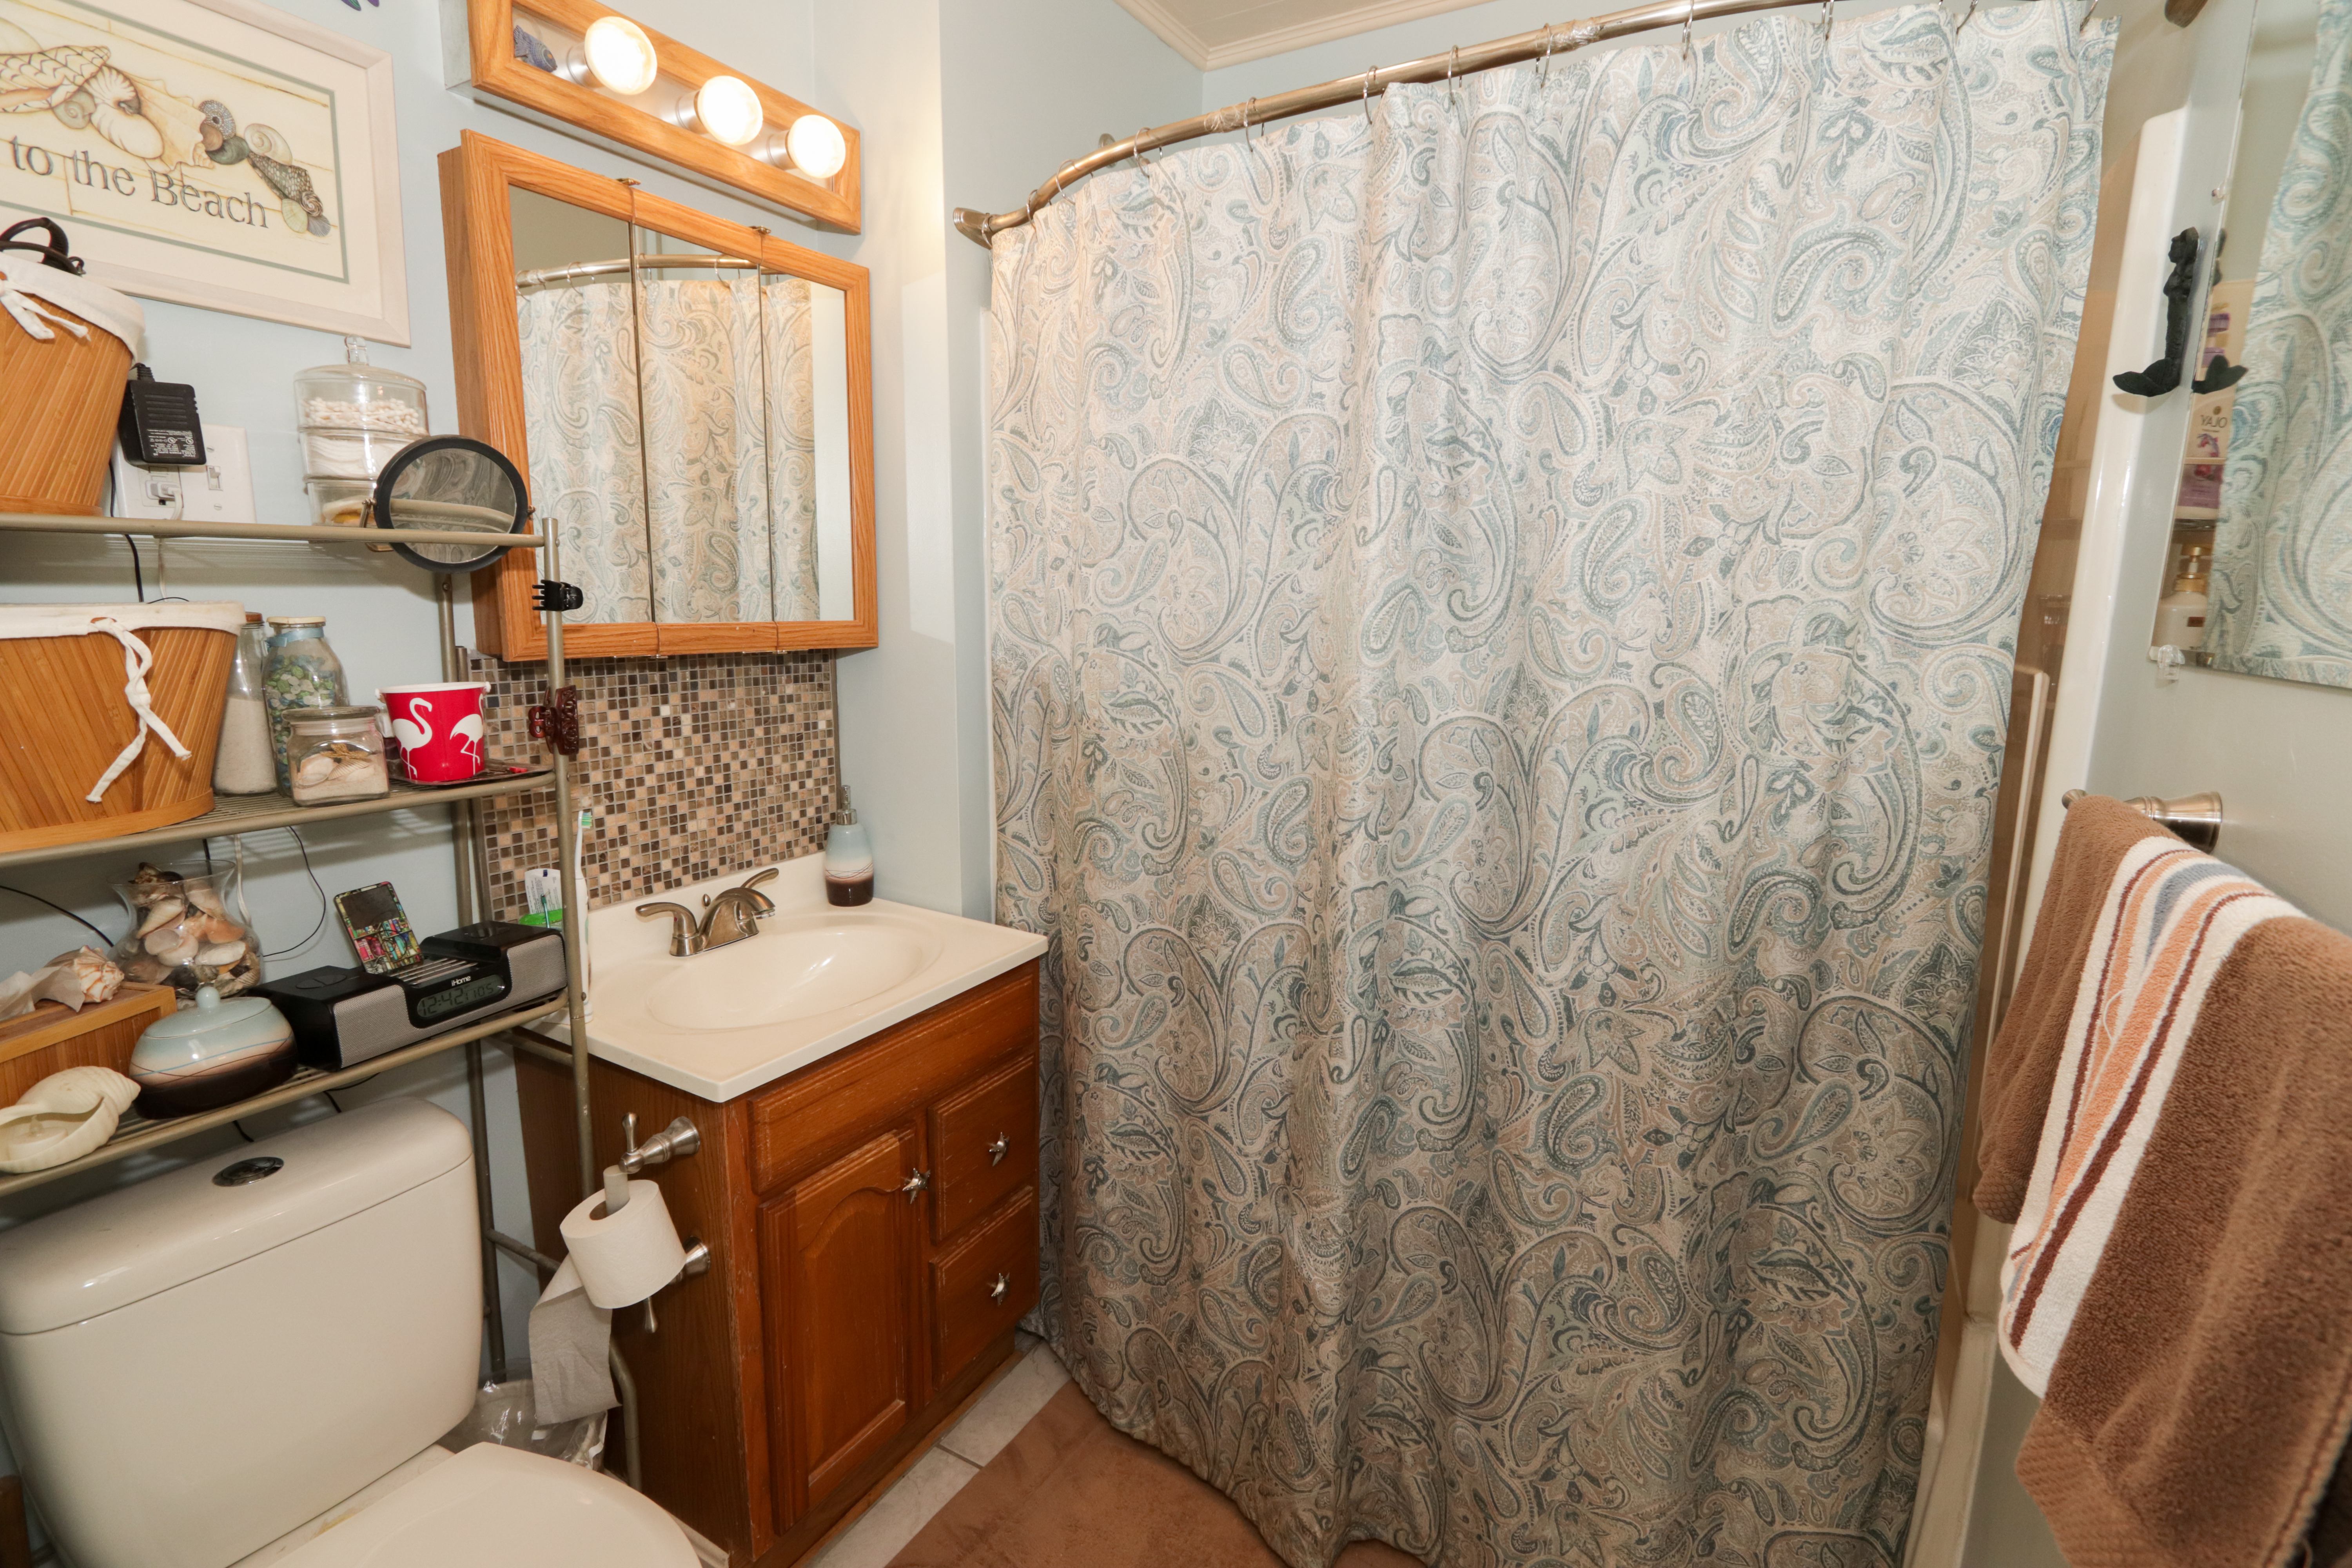 South Nashua House for Sale 34.5 Russell Ave Nashua NH 03060 full bath